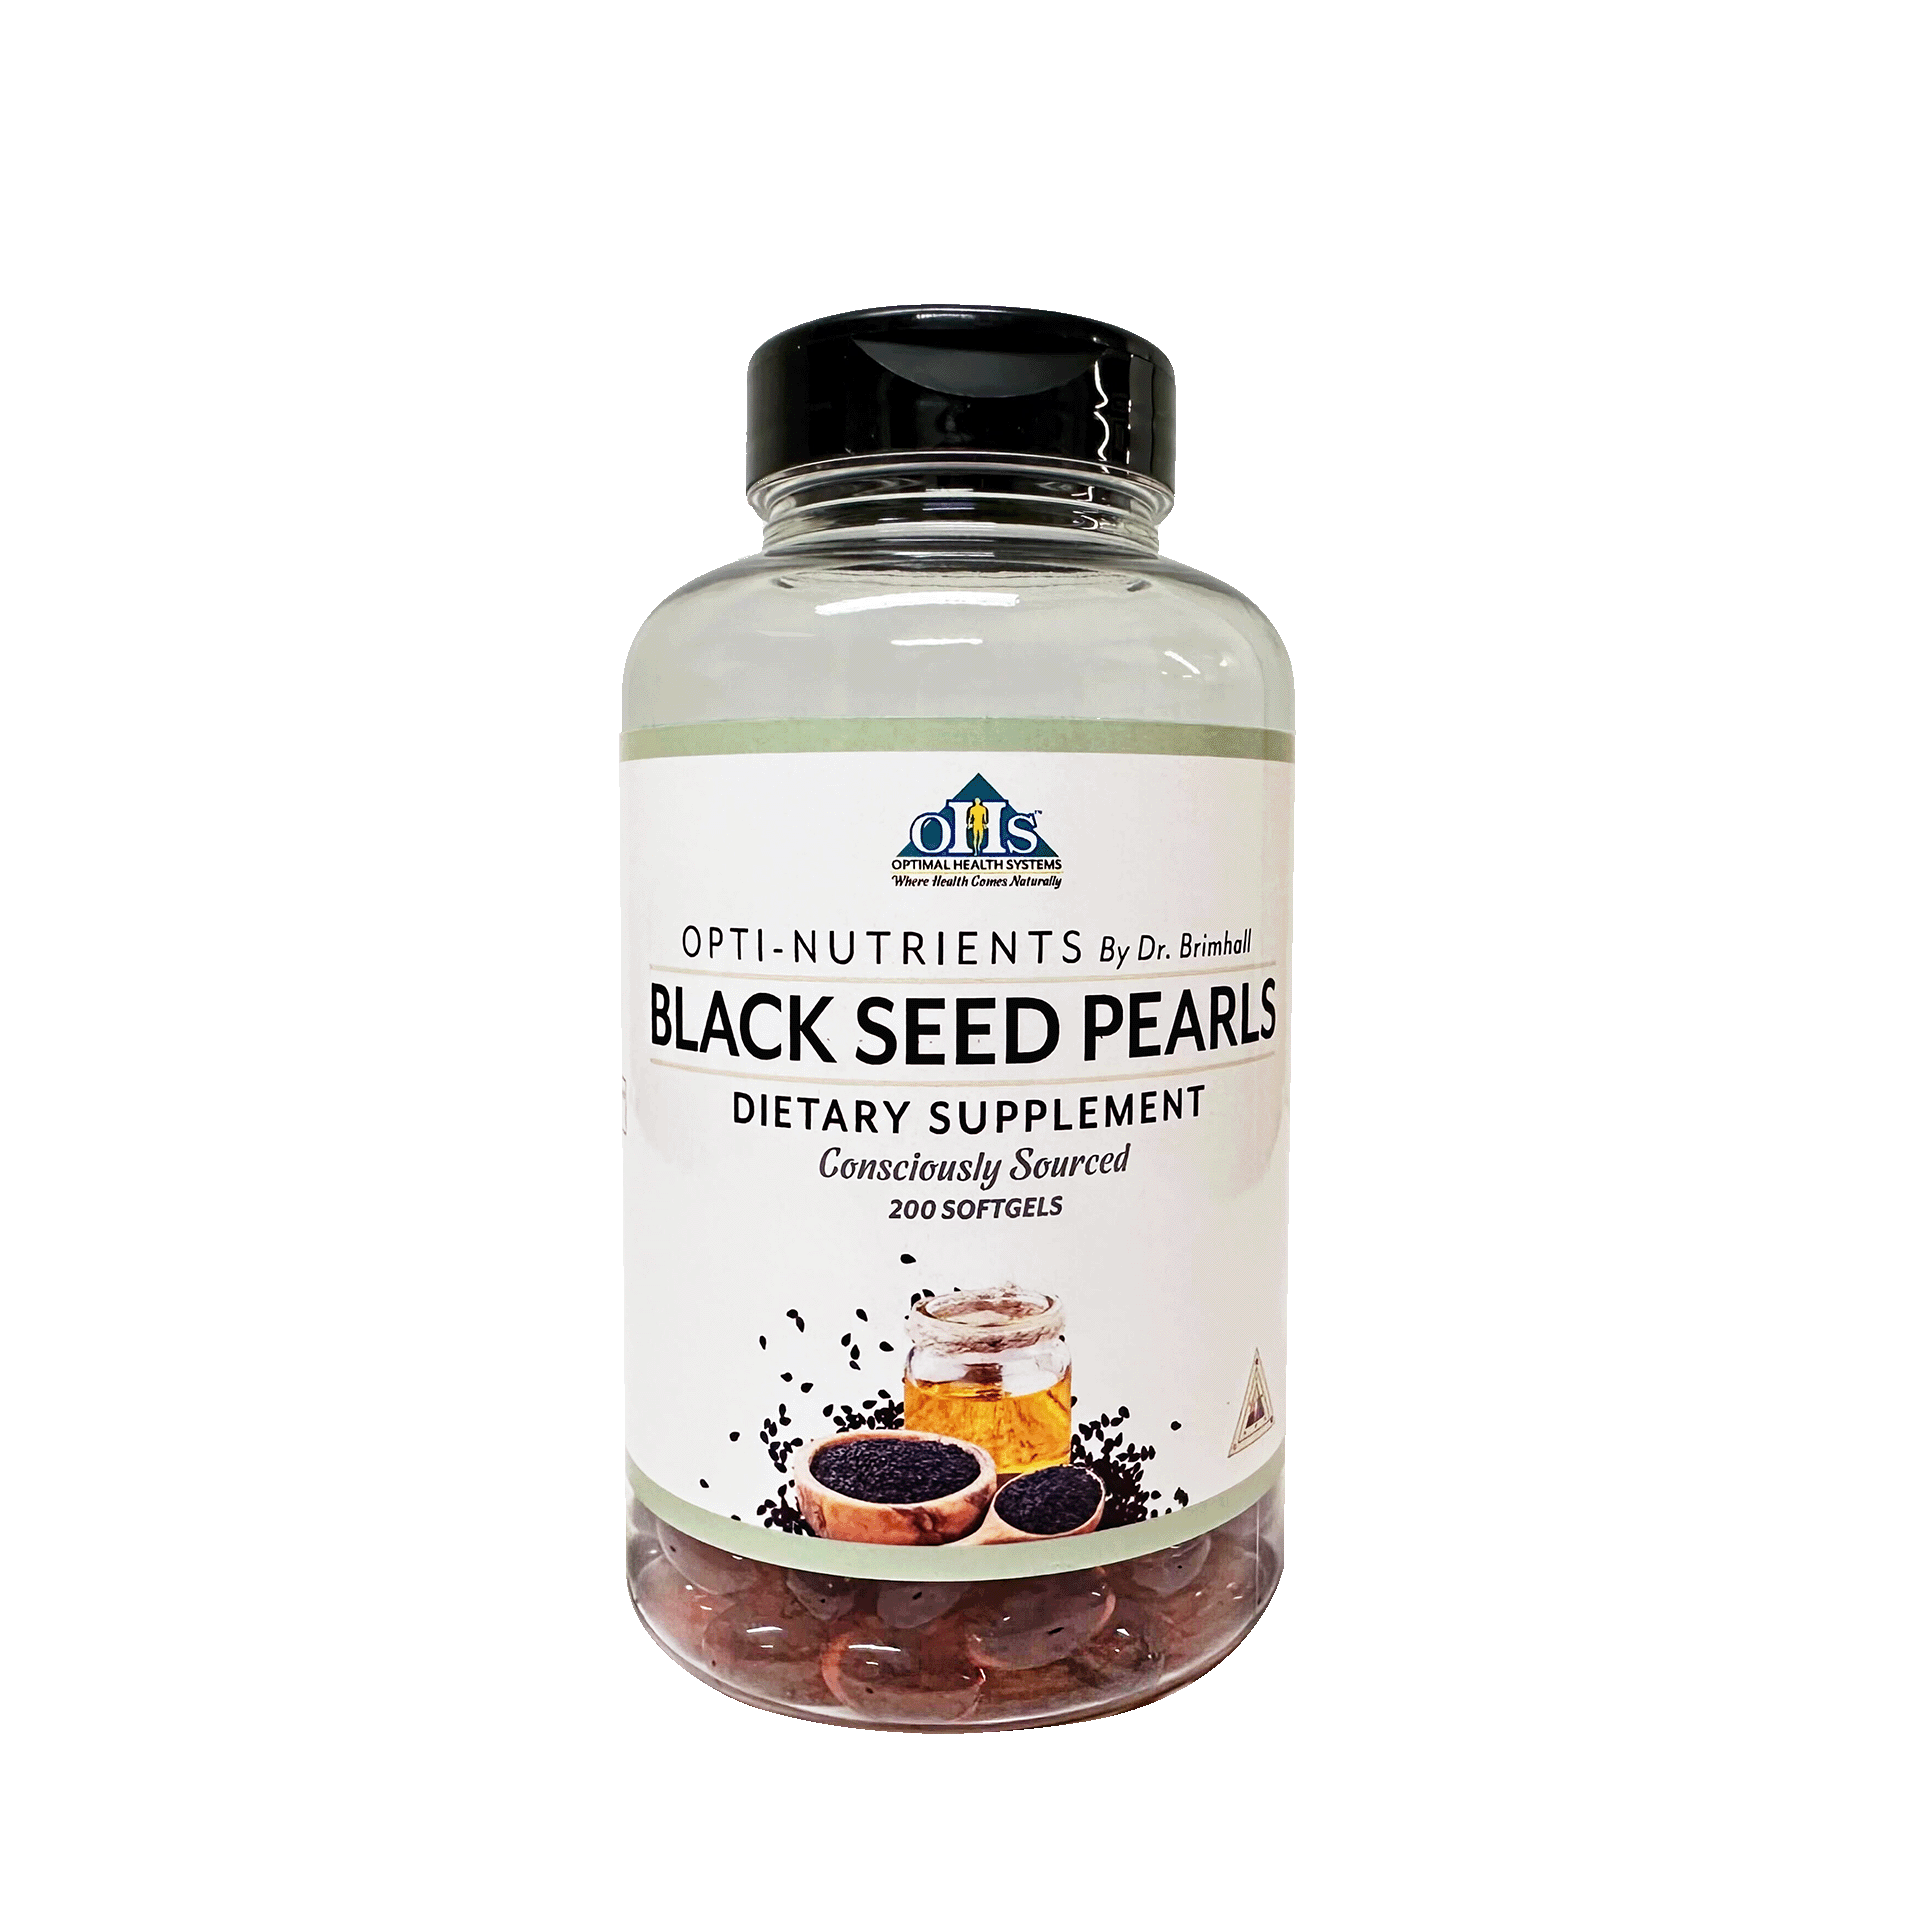 Image of a bottle of Opti Black Seed Pearls.